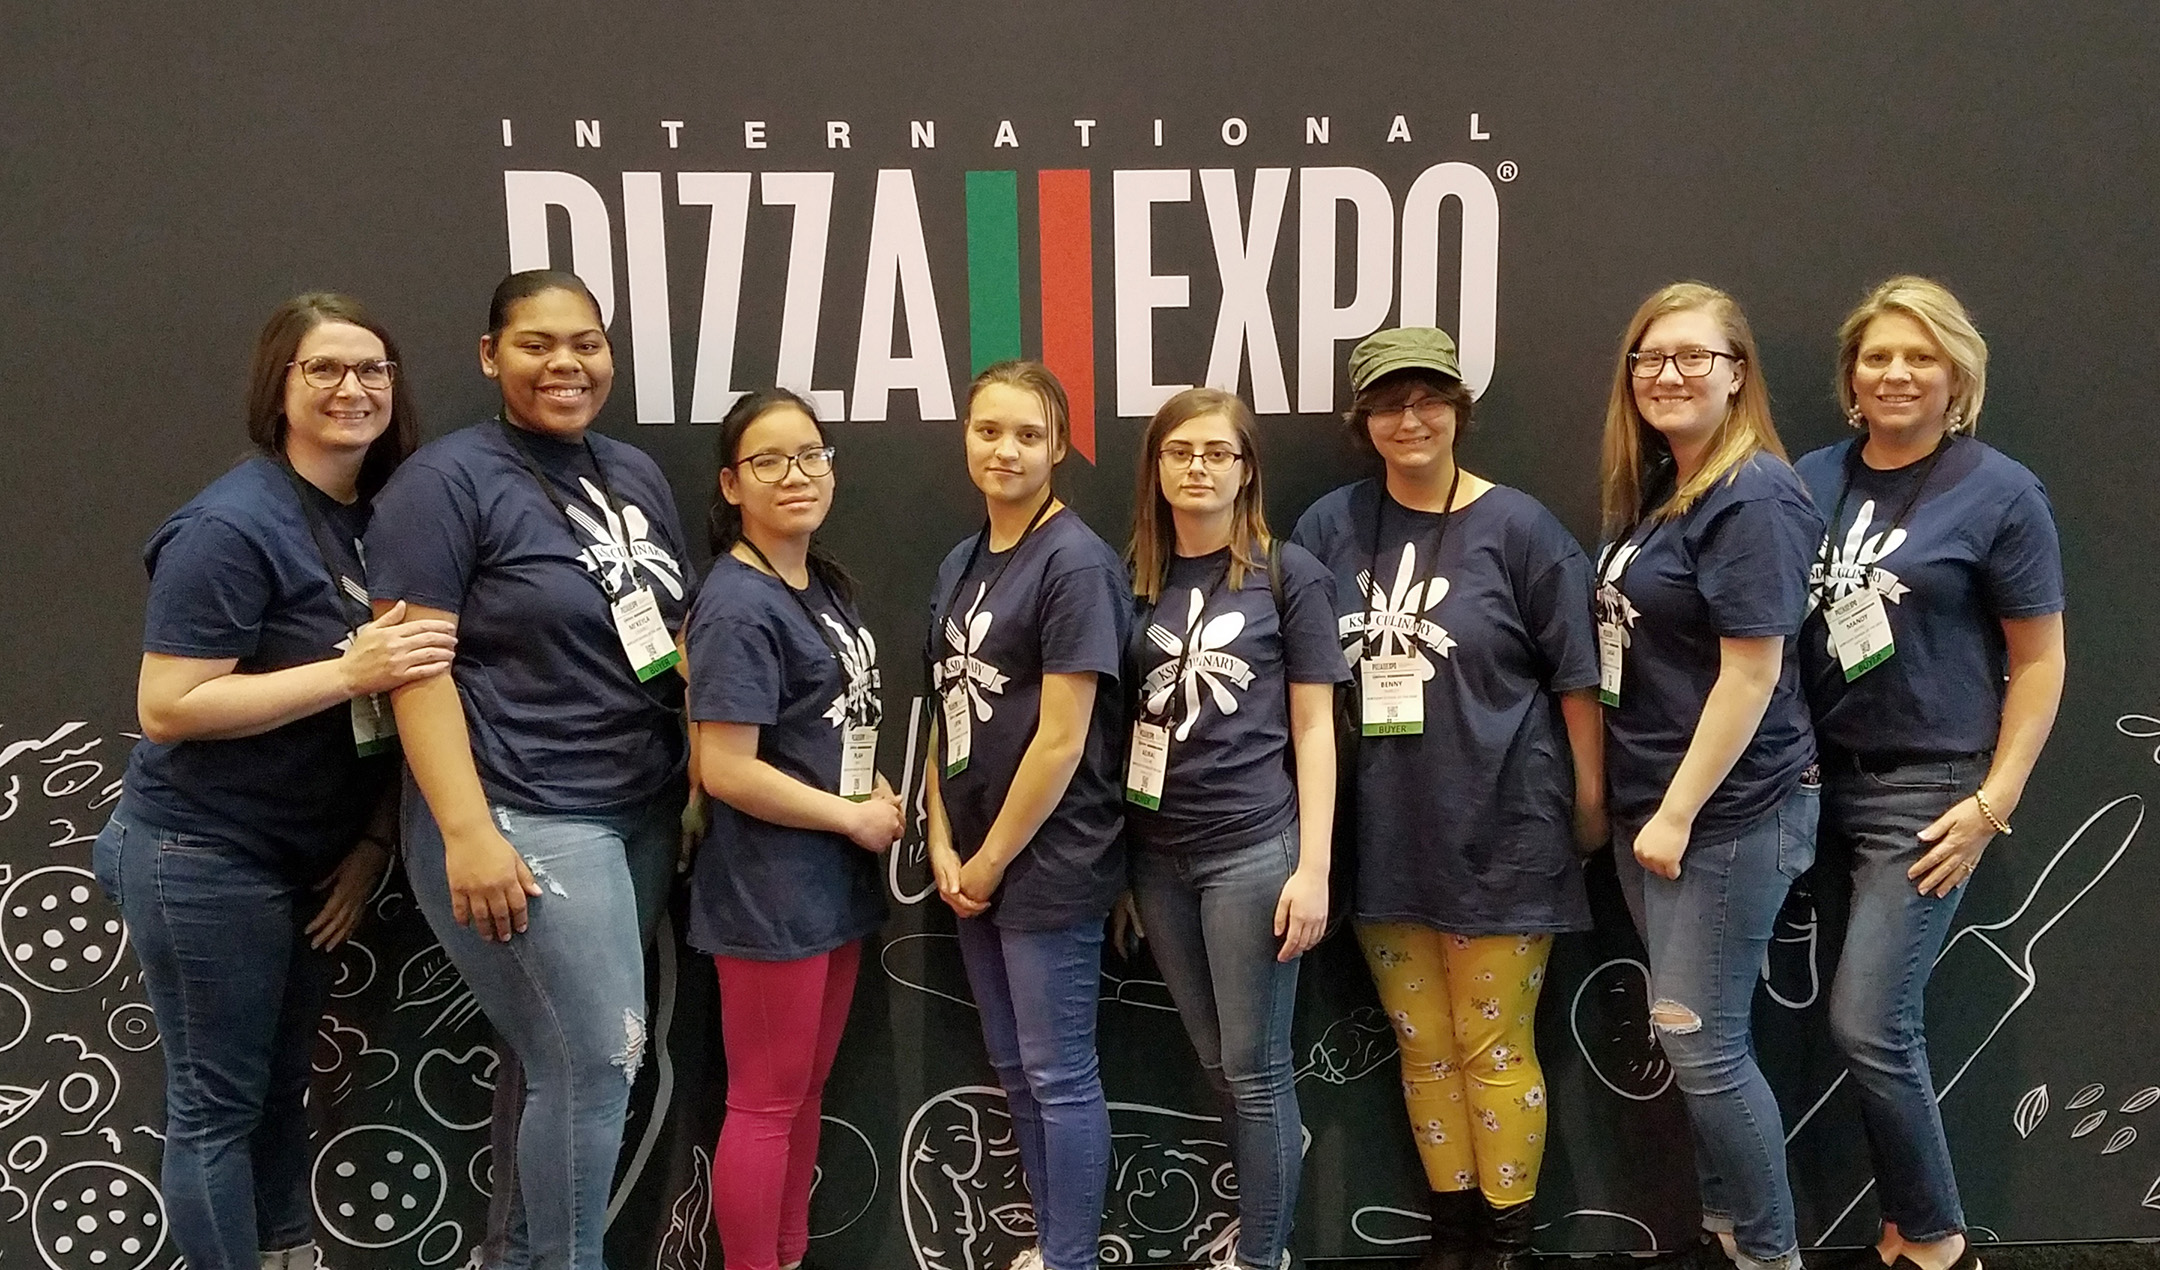 Six students from the Kentucky School for the Deaf (KSD) placed third in the 2019 Deaf Culinary Bowl in Las Vegas. The Def Chefs, as they call themselves, consist of seniors Sarah Joiner and Aeiral Collins, juniors Layne Adkins, Plah Meh and Benny Shirley, and sophomore Mi’Keyla Crumble. While on the trip, KSD’s students attended the International Pizza Expo, which also was being held in Las Vegas. Photo submitted by Mandy Byrne